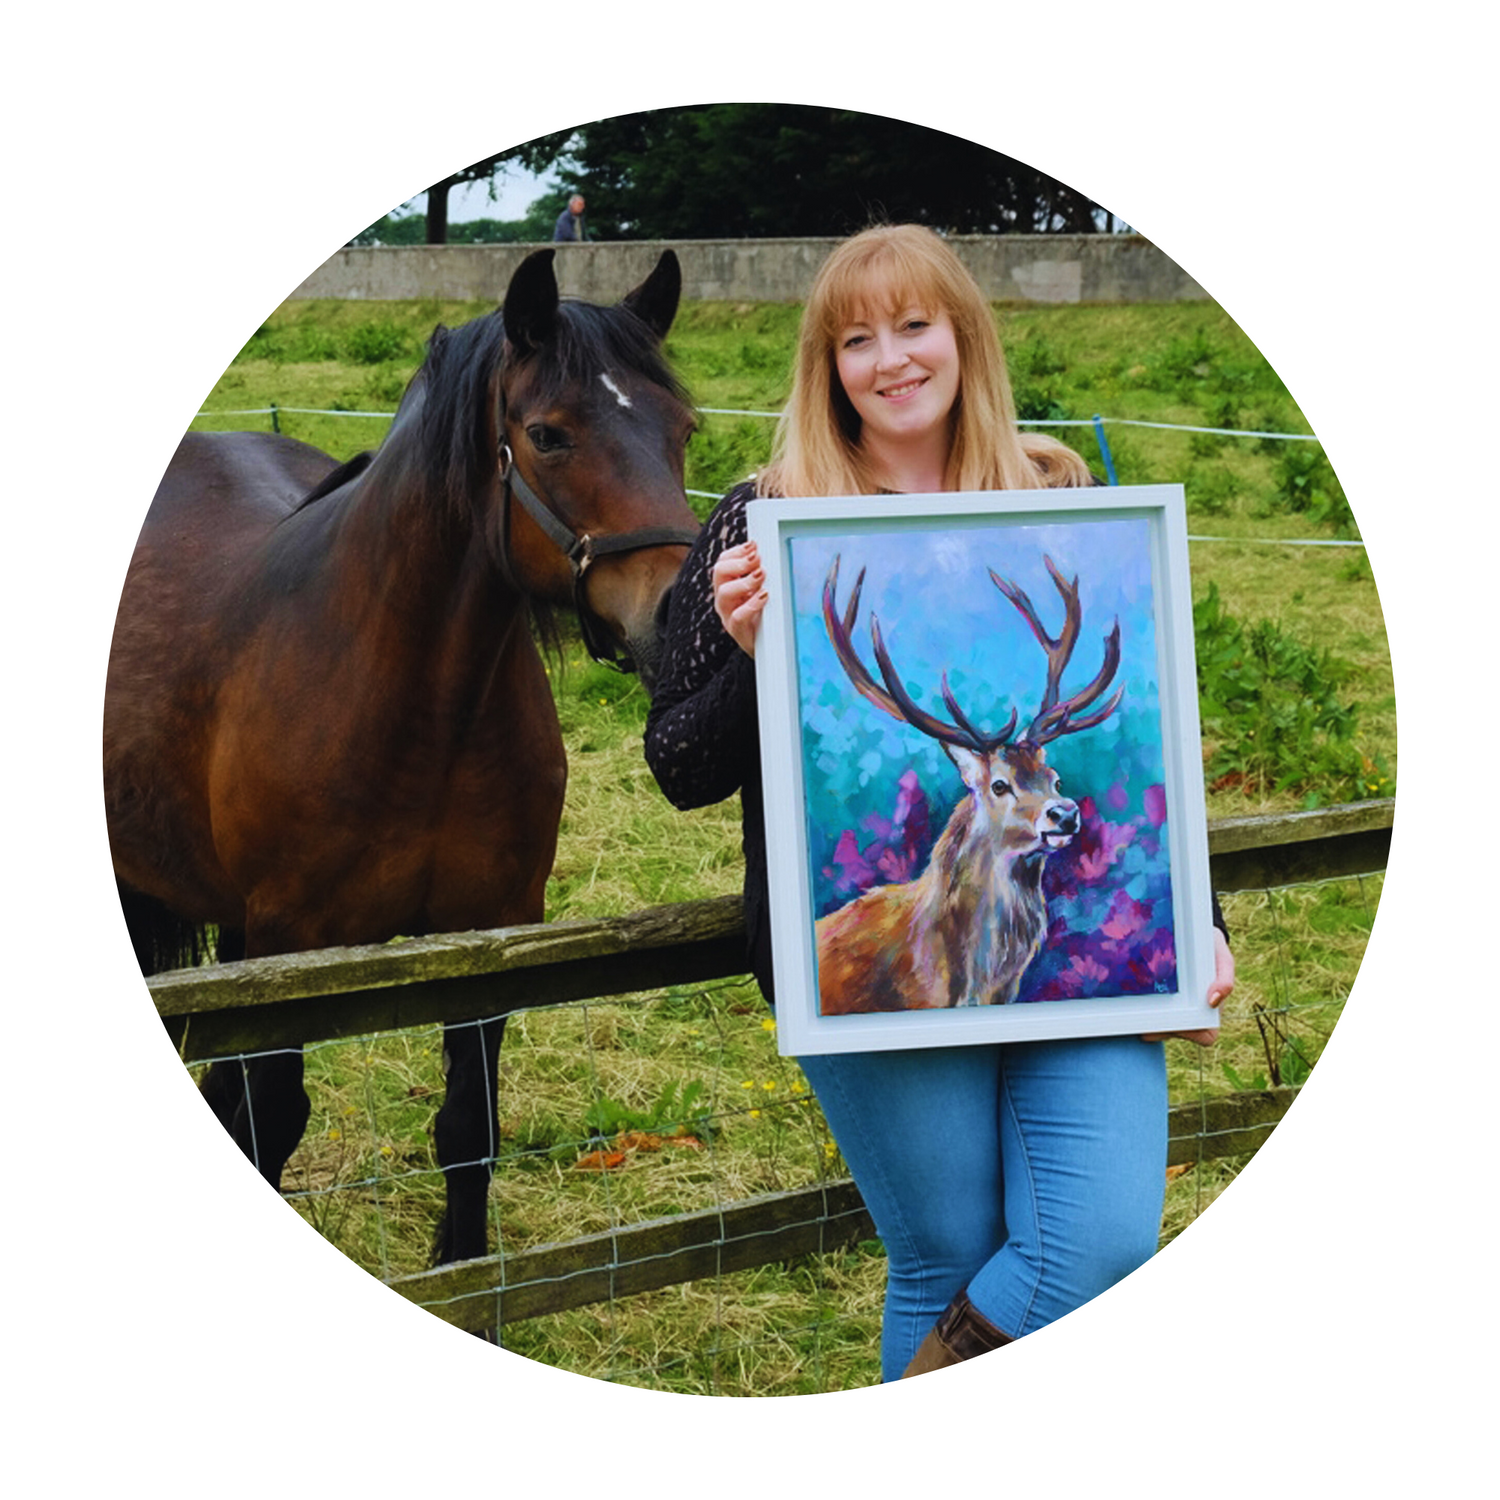 Animal artist Anj Jamieson leans against a fence, displaying her stag painting alongside a bay horse